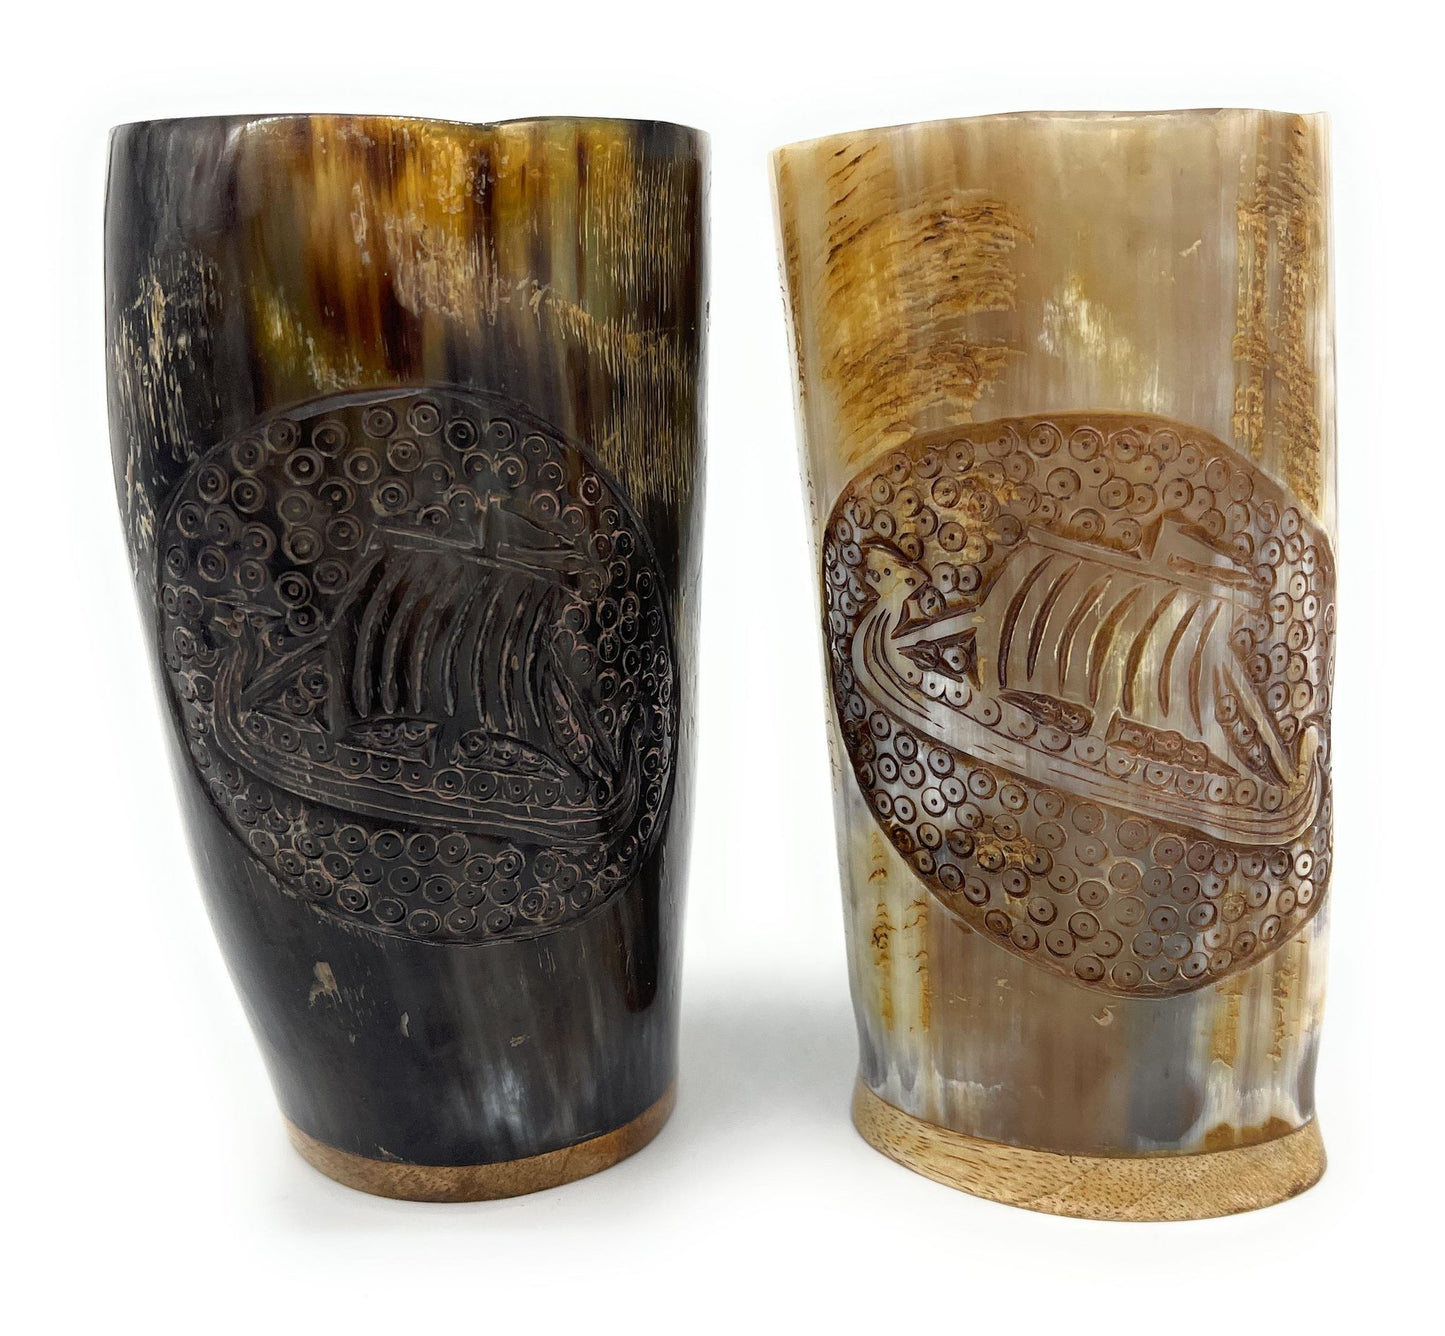 Sanctuary Traders Viking Horn Drinking Cup | Beer Stein | Nordic Cup | Genuine Ox Horn | 10-14oz Cup - 1 piece set